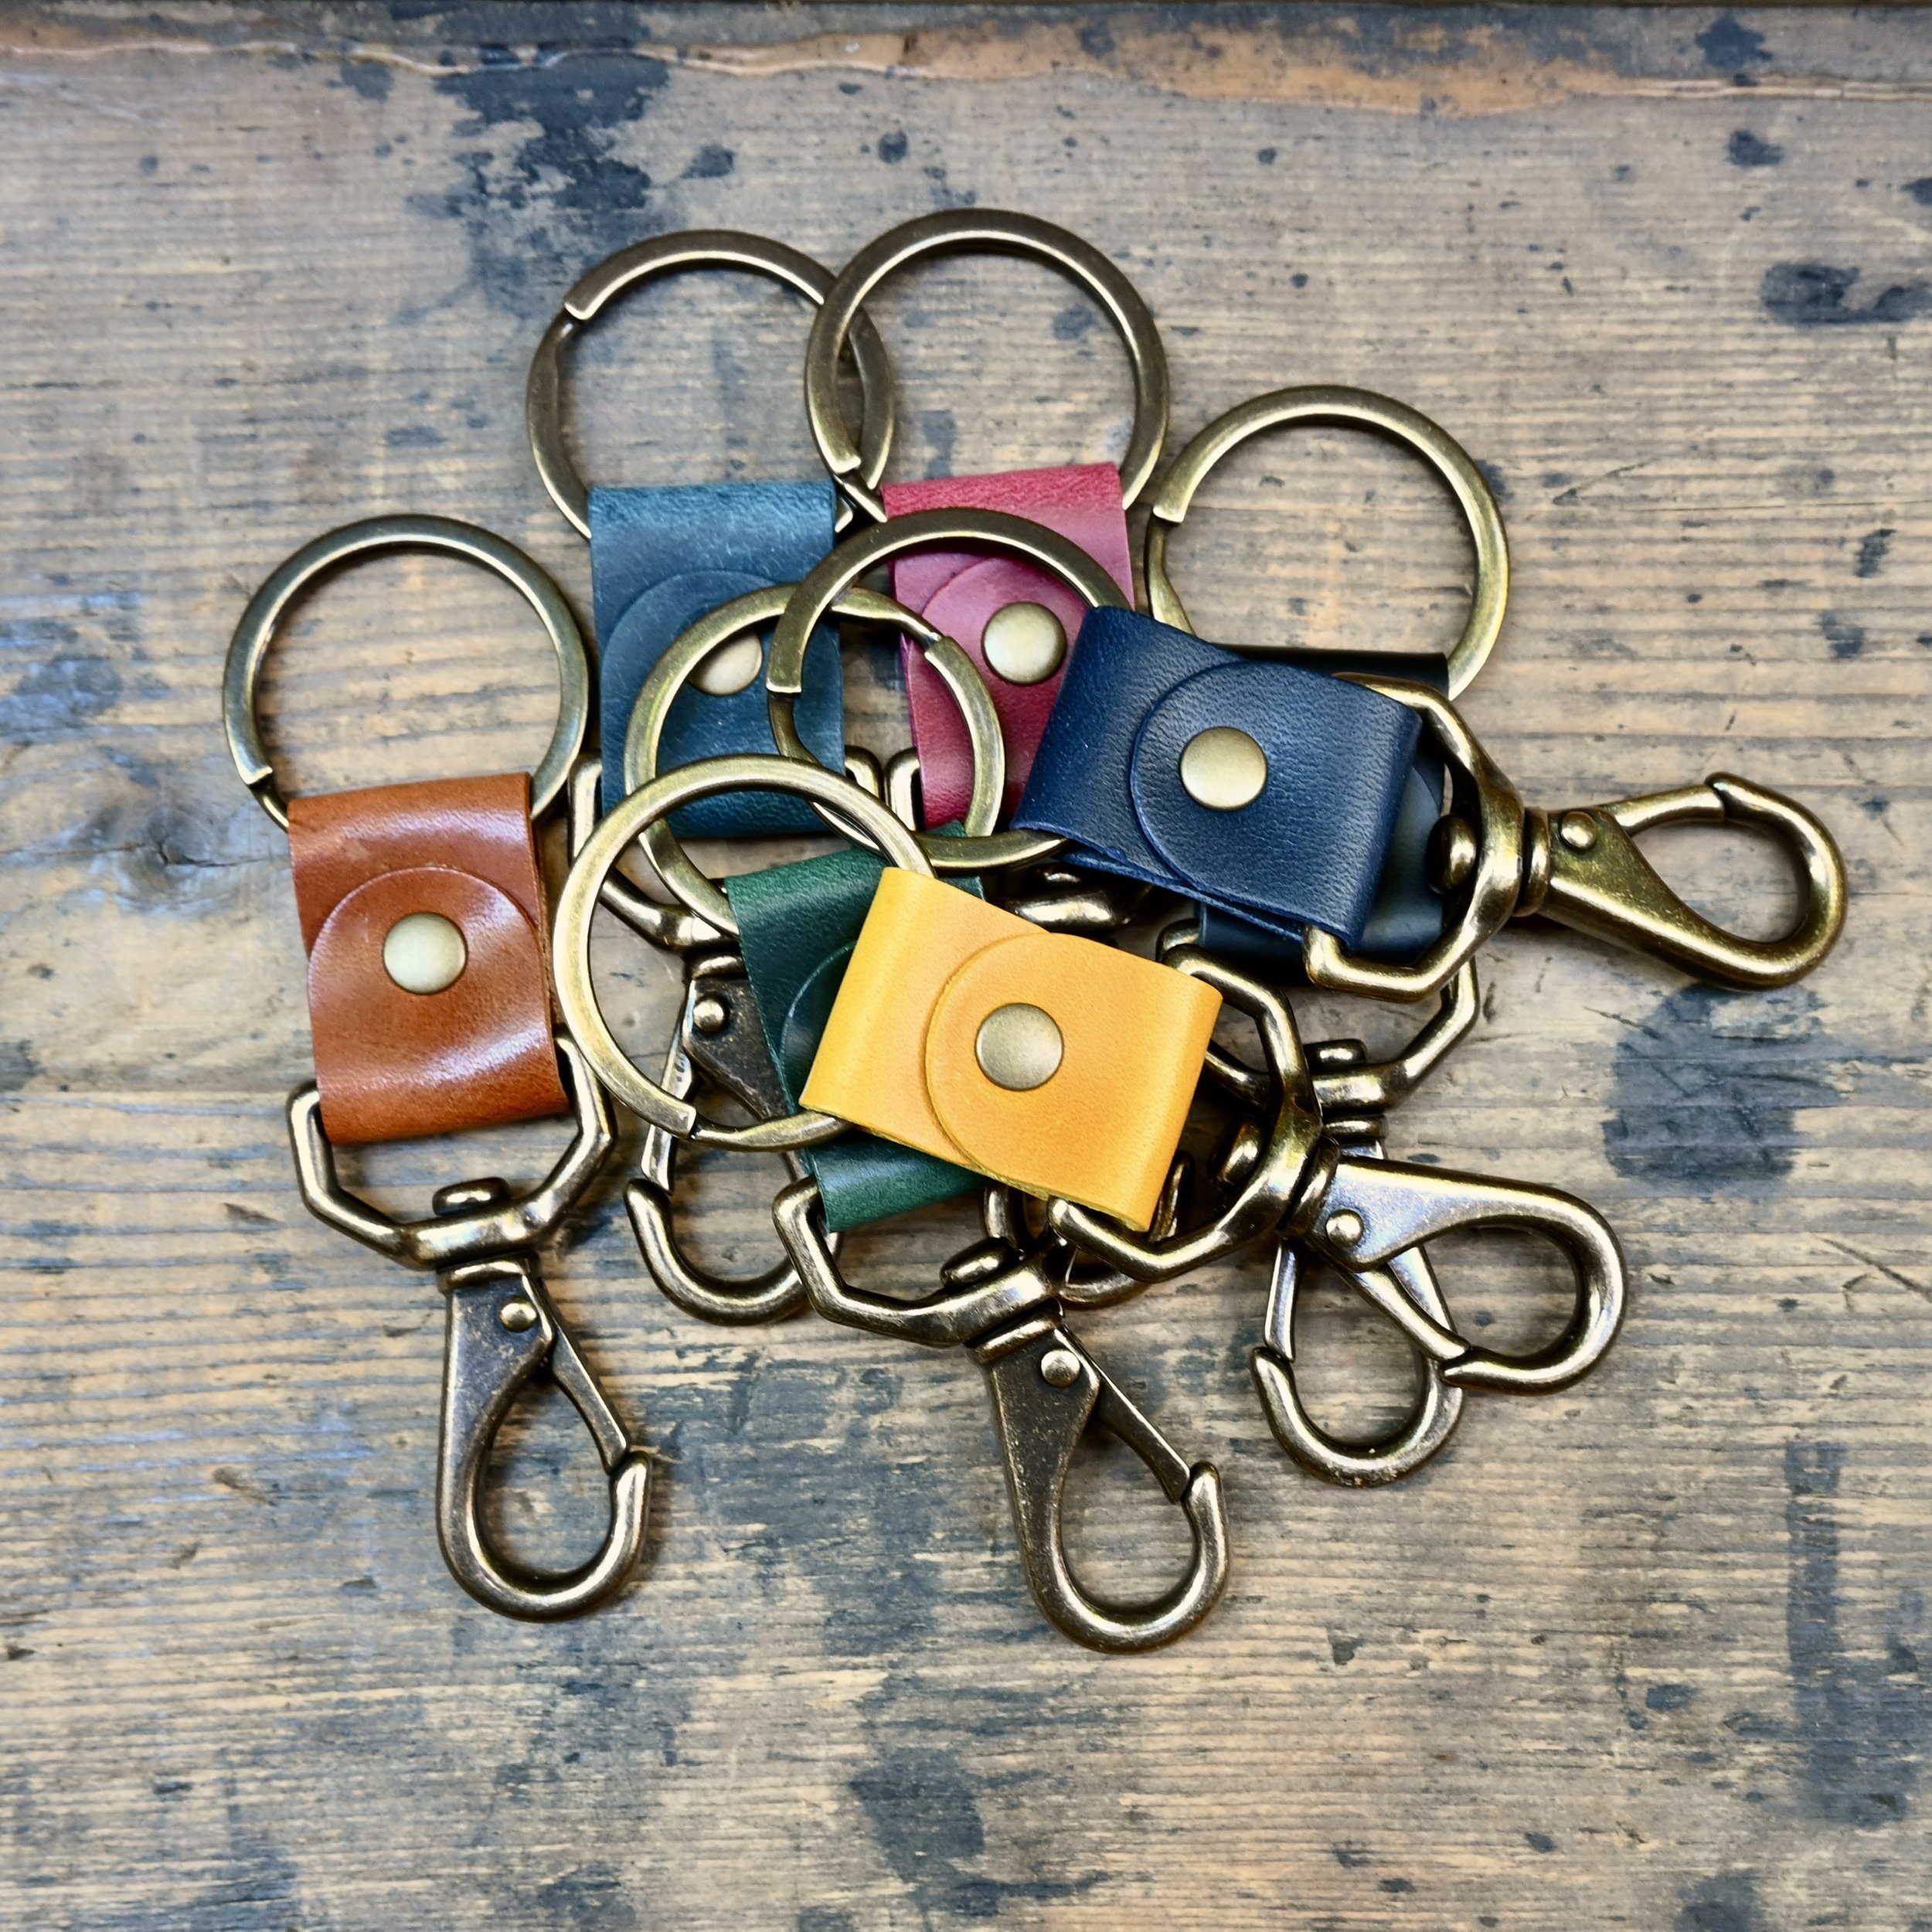 Share more than 150 leather key ring